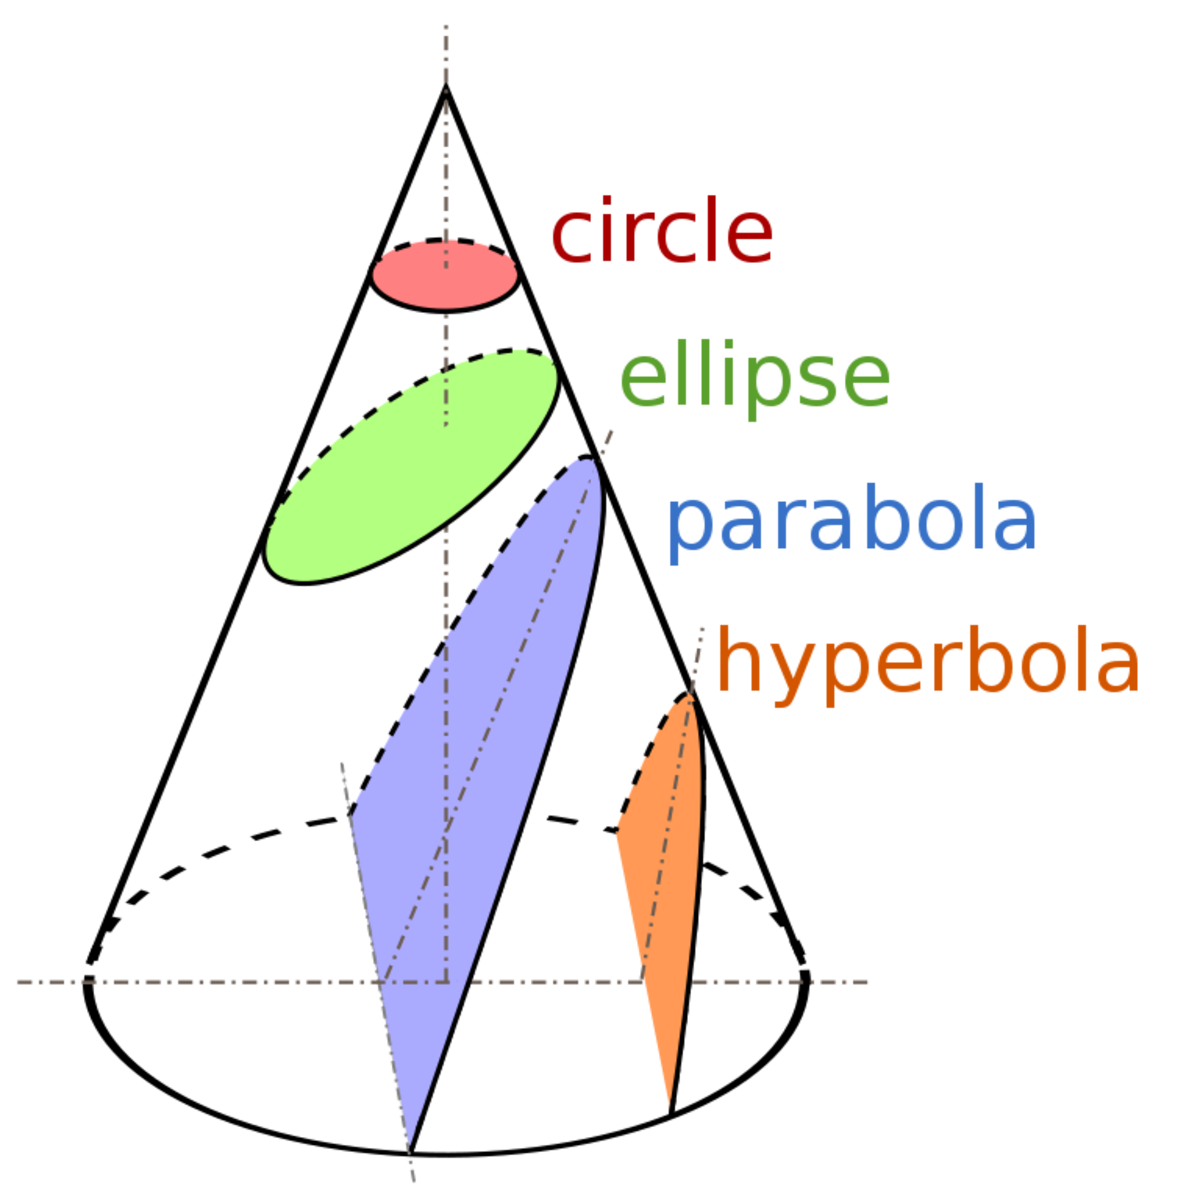 Conic sections.